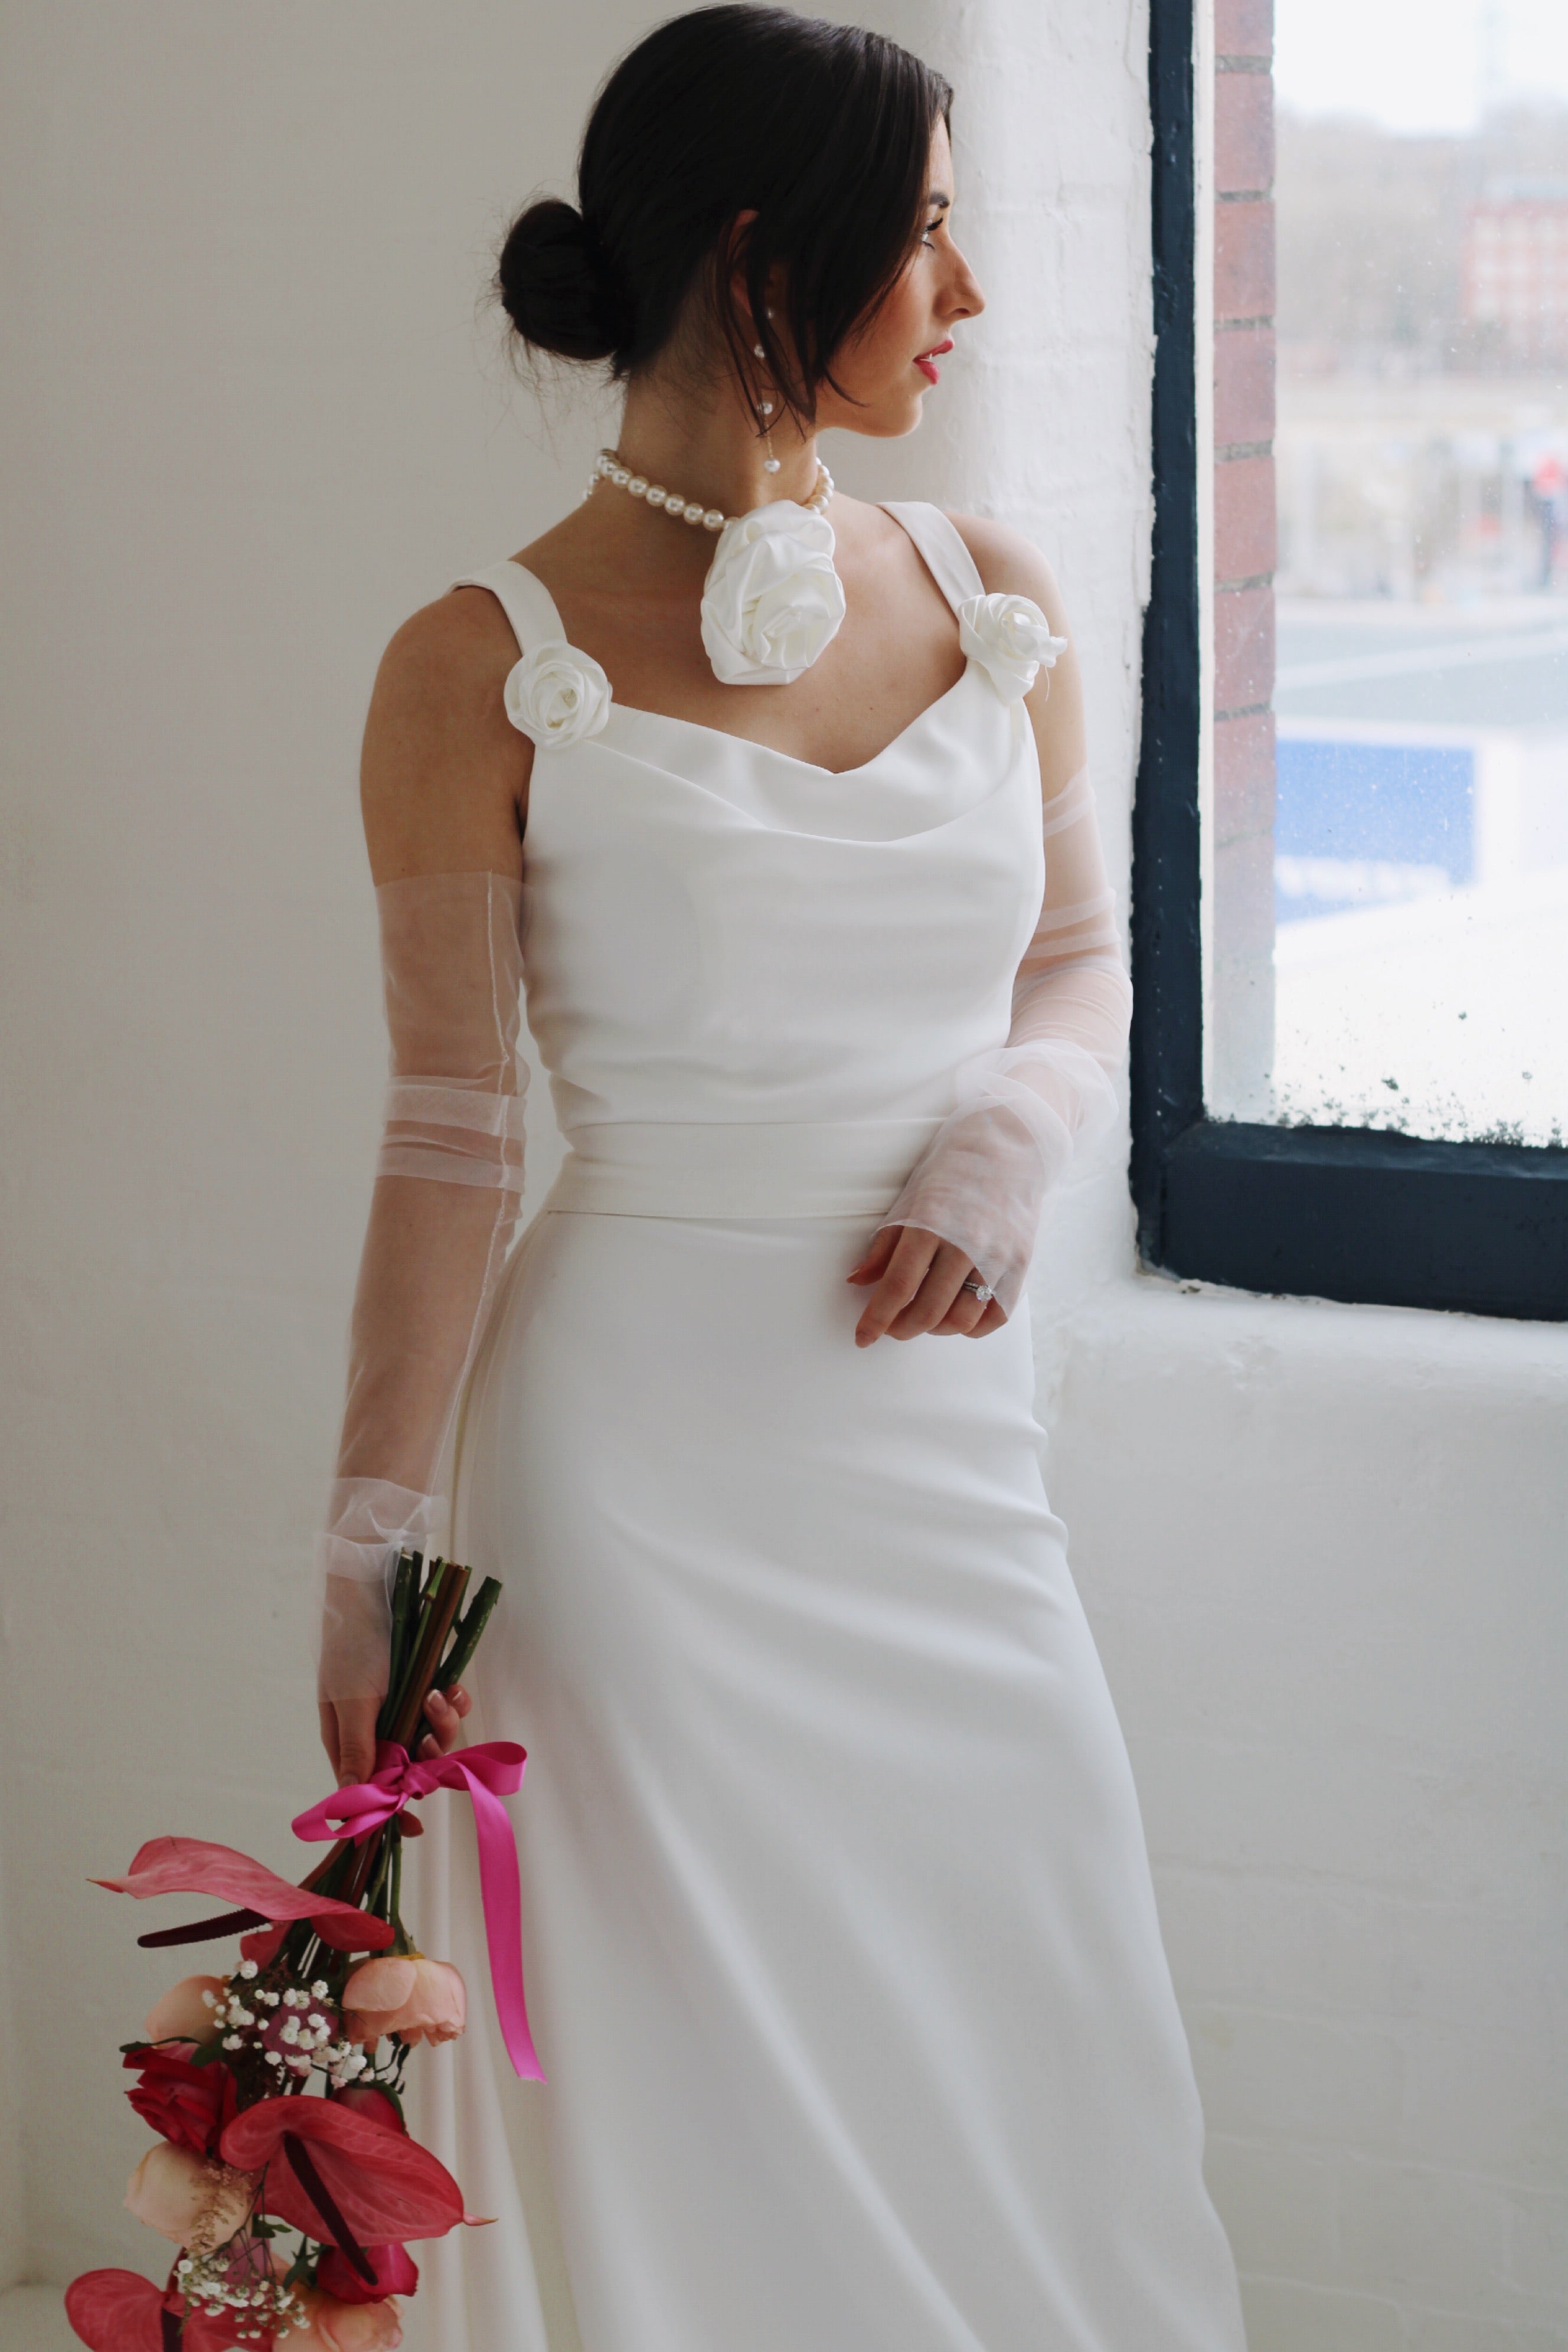 Try At Home -  Rosa Crepe Bridal Gown